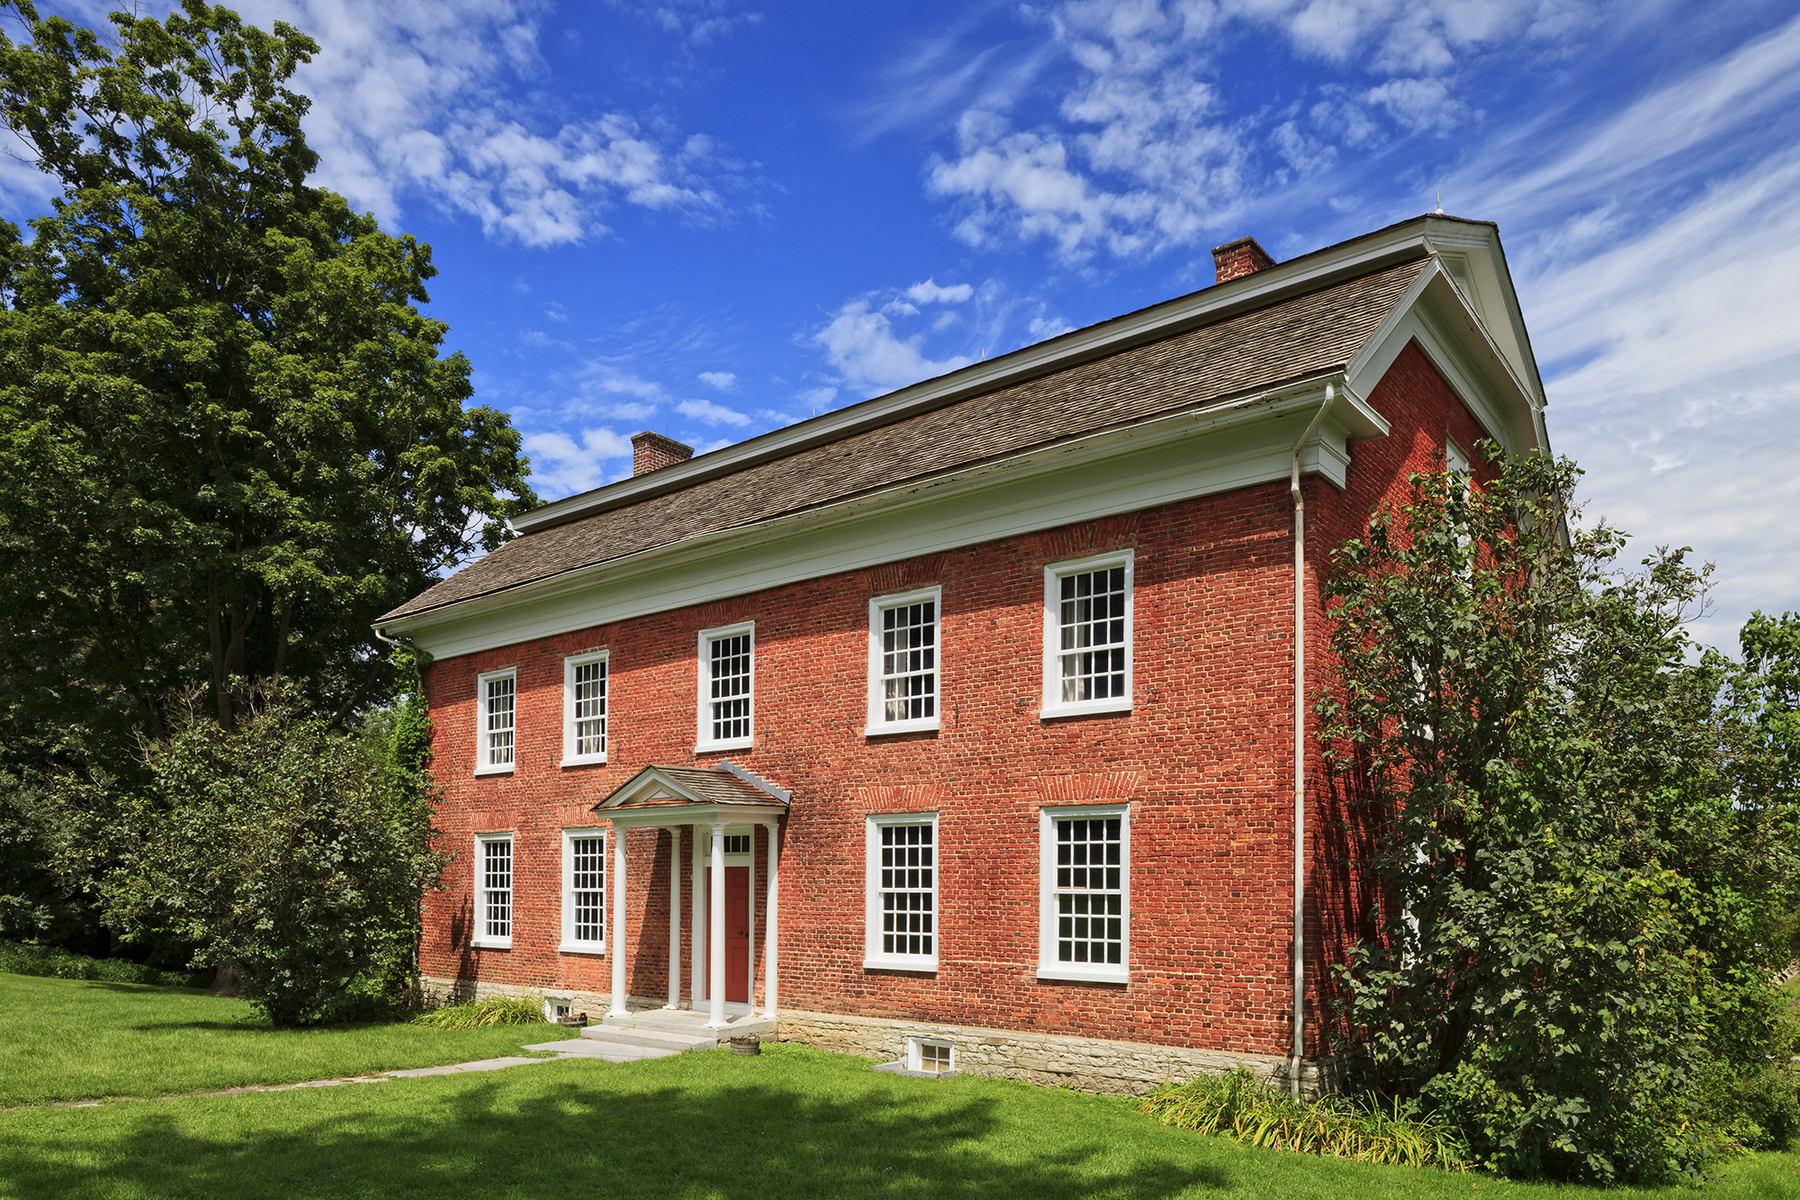 General Nicholas Herkimer Home 1764 ... Little Falls, NY : Historical : Architectural Photography | David Miller | David R. Miller | Photography | American | Architectural | Architects | Construction | Contractors | Nationwide | Landscape | Designers | Goggle | Revolutionary War | Fine Art | Stock